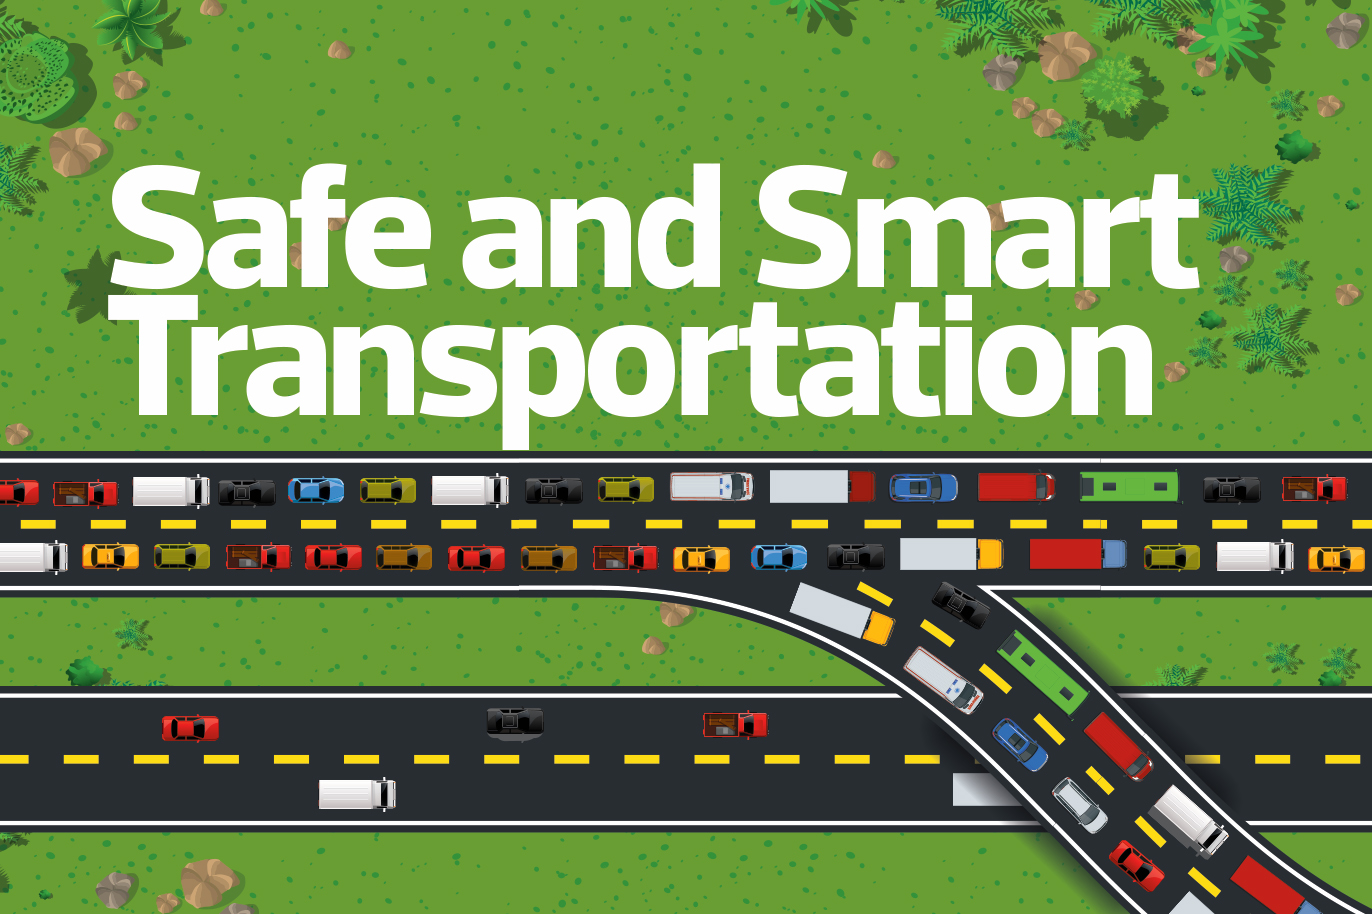 Smart Traffic Management Systems Improve Safety